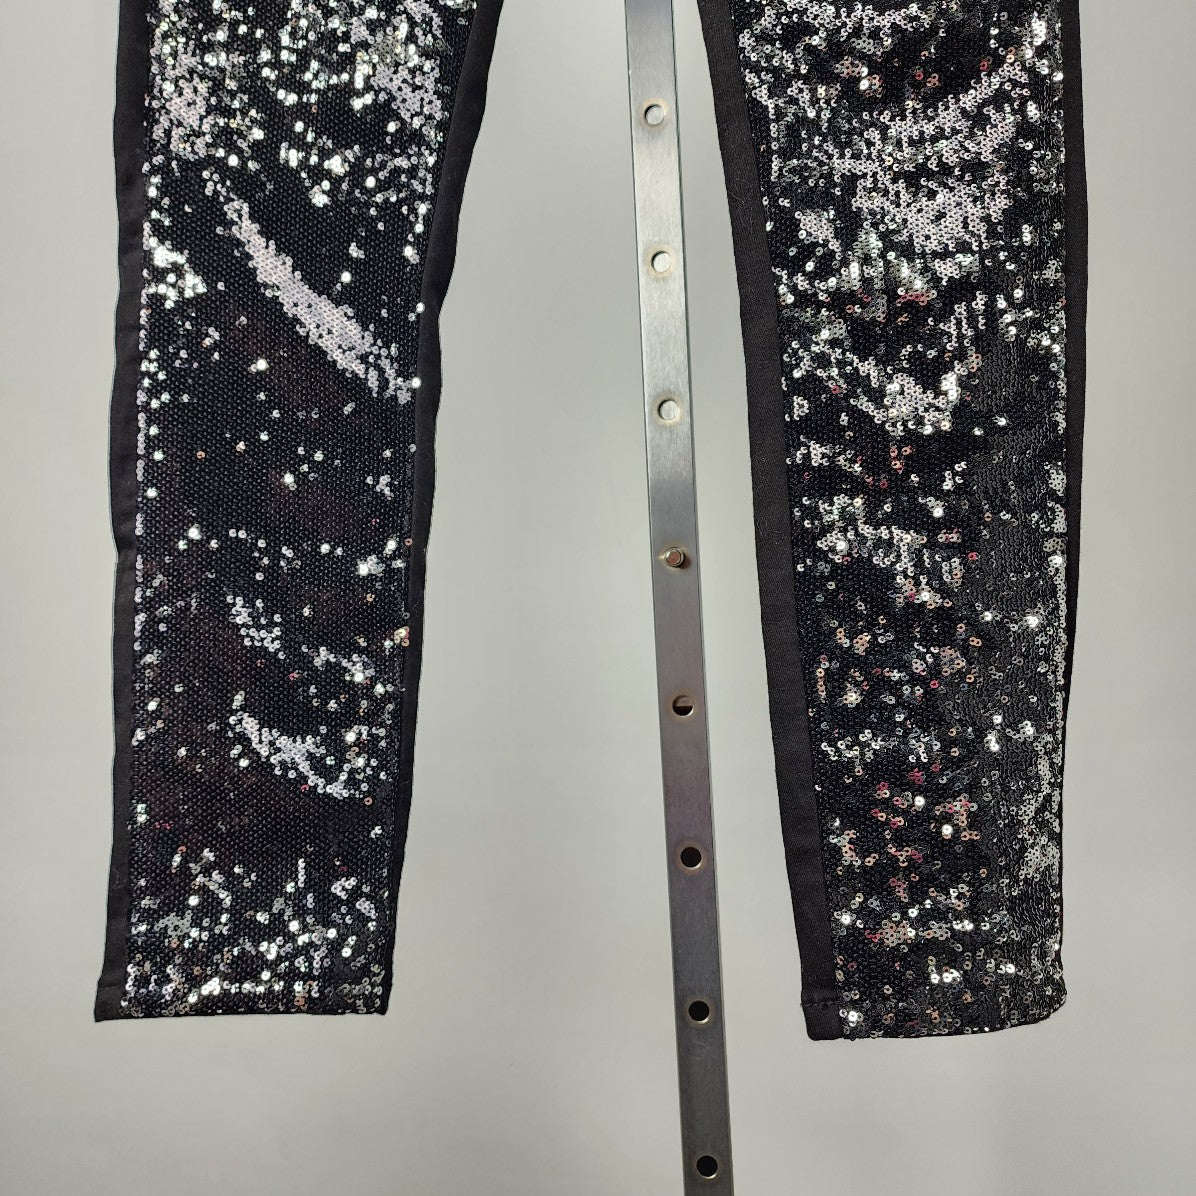 Lola Jeans Black Sequined Stretchy Jeans Size 8